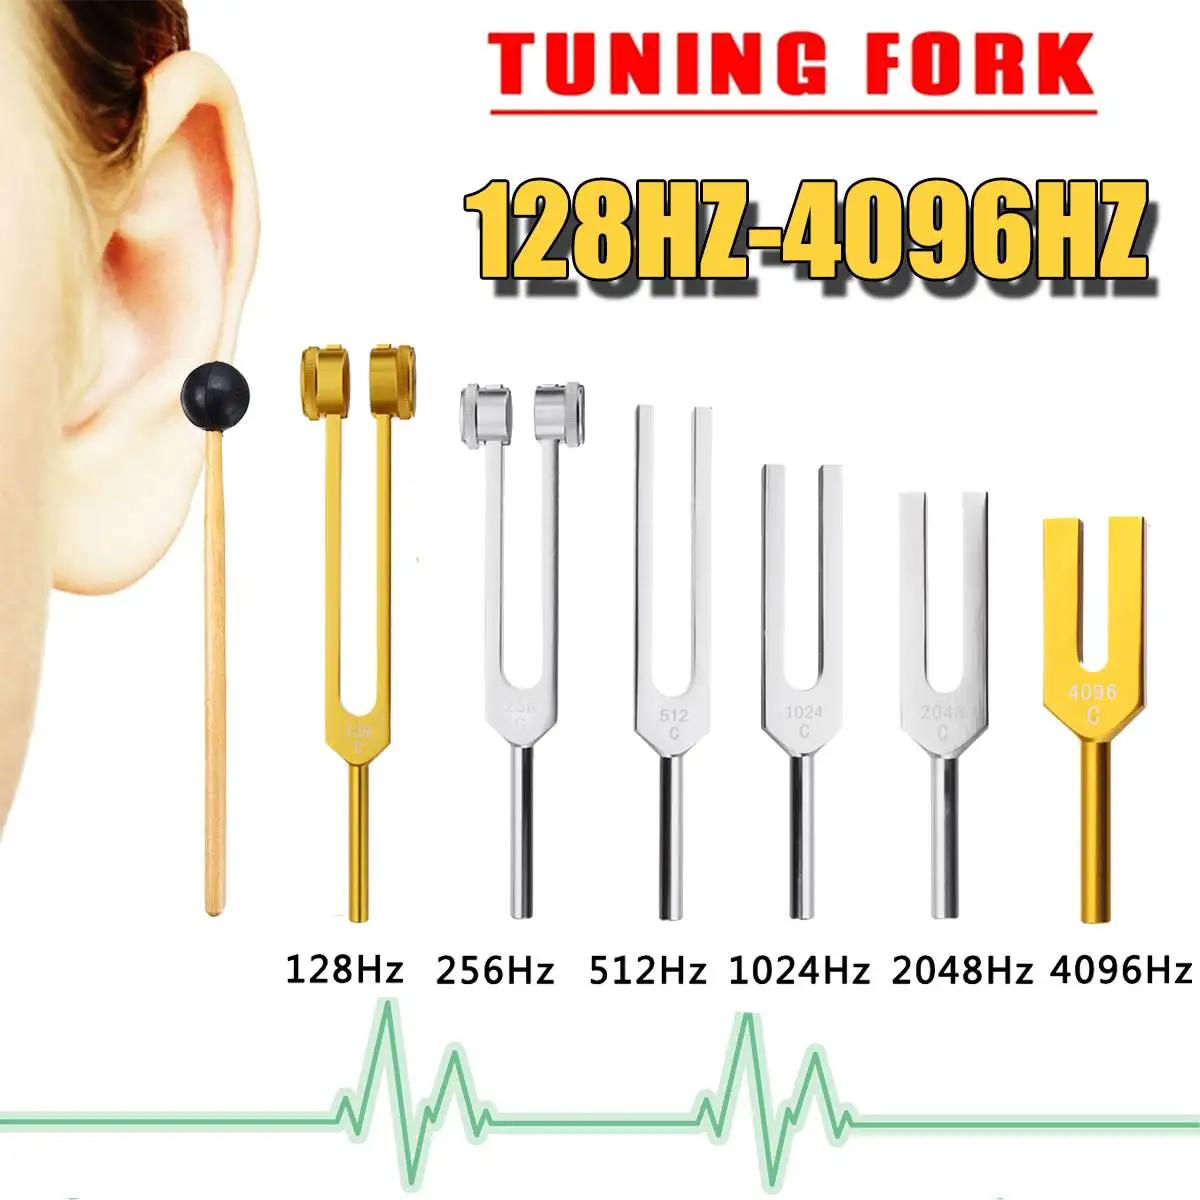 

6Pcs 128/256/512/1024/4096HZ Medical Tuning Fork Chakra Healing Sound Therapy Tuner+Hammer Ball+Mallet+Bag Musical Instrument